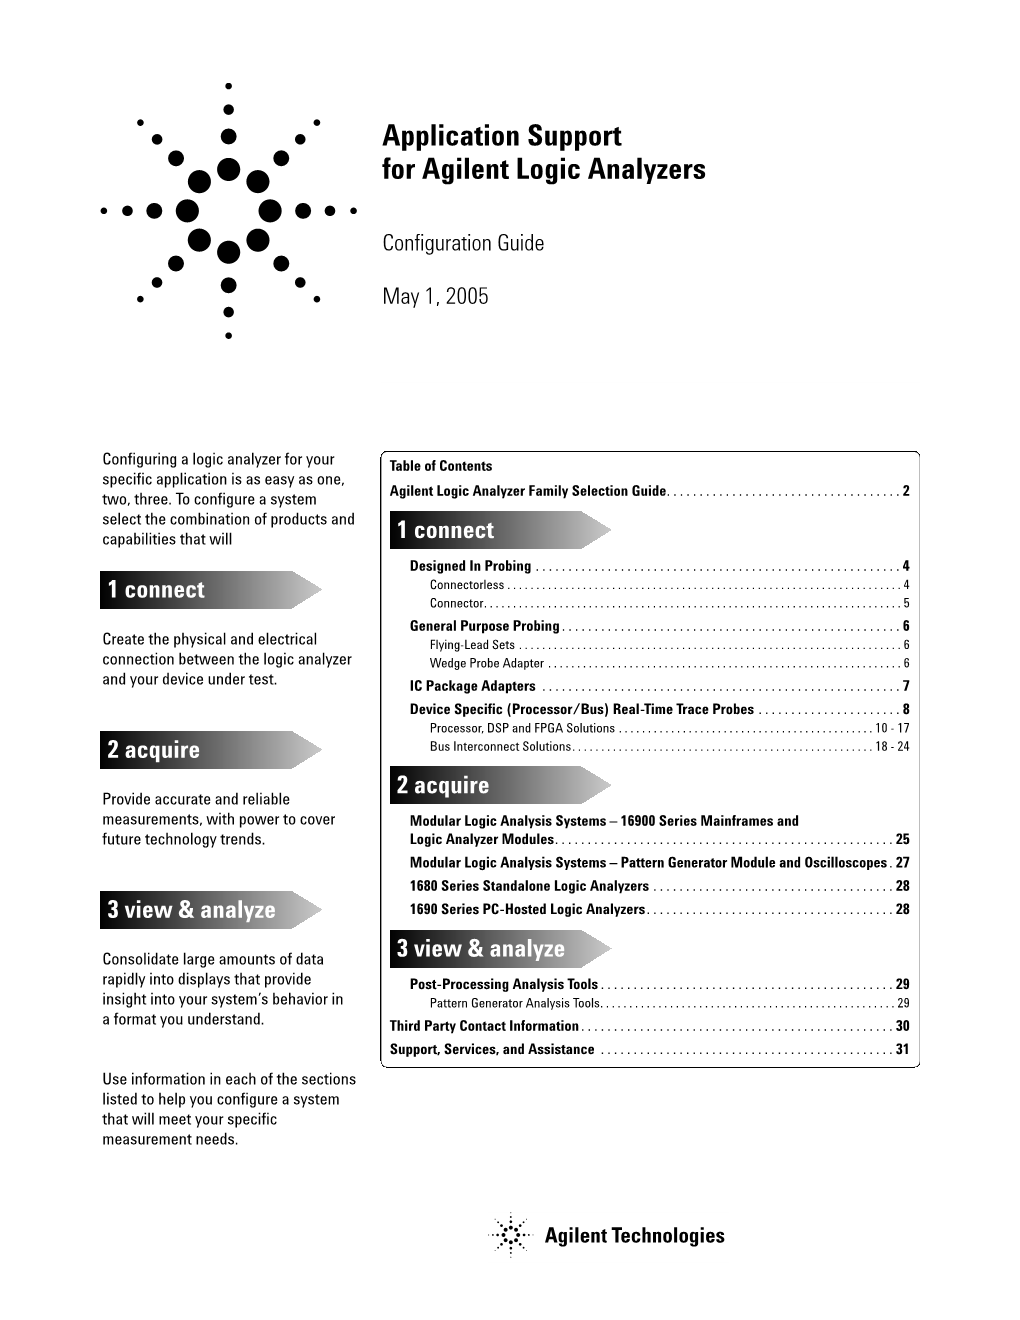 Application Support for Agilent Logic Analyzers